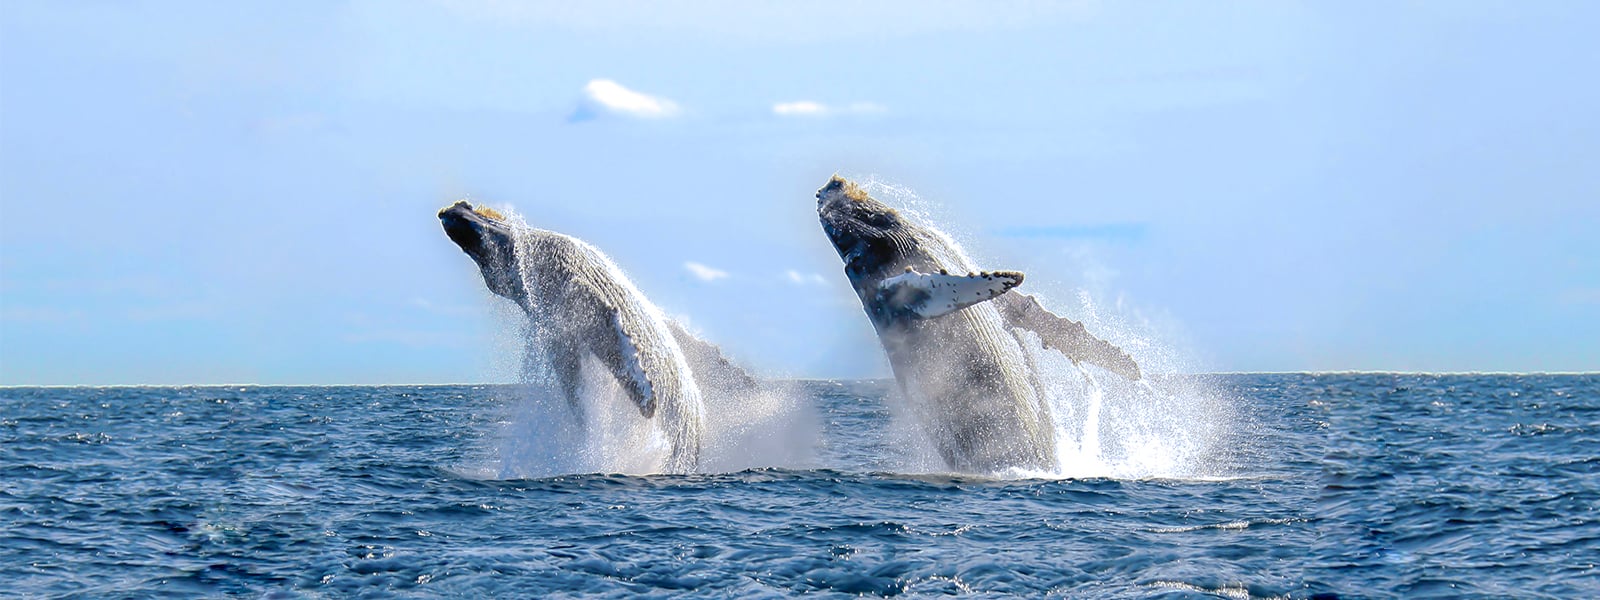 Humpback whales in Los Cabos